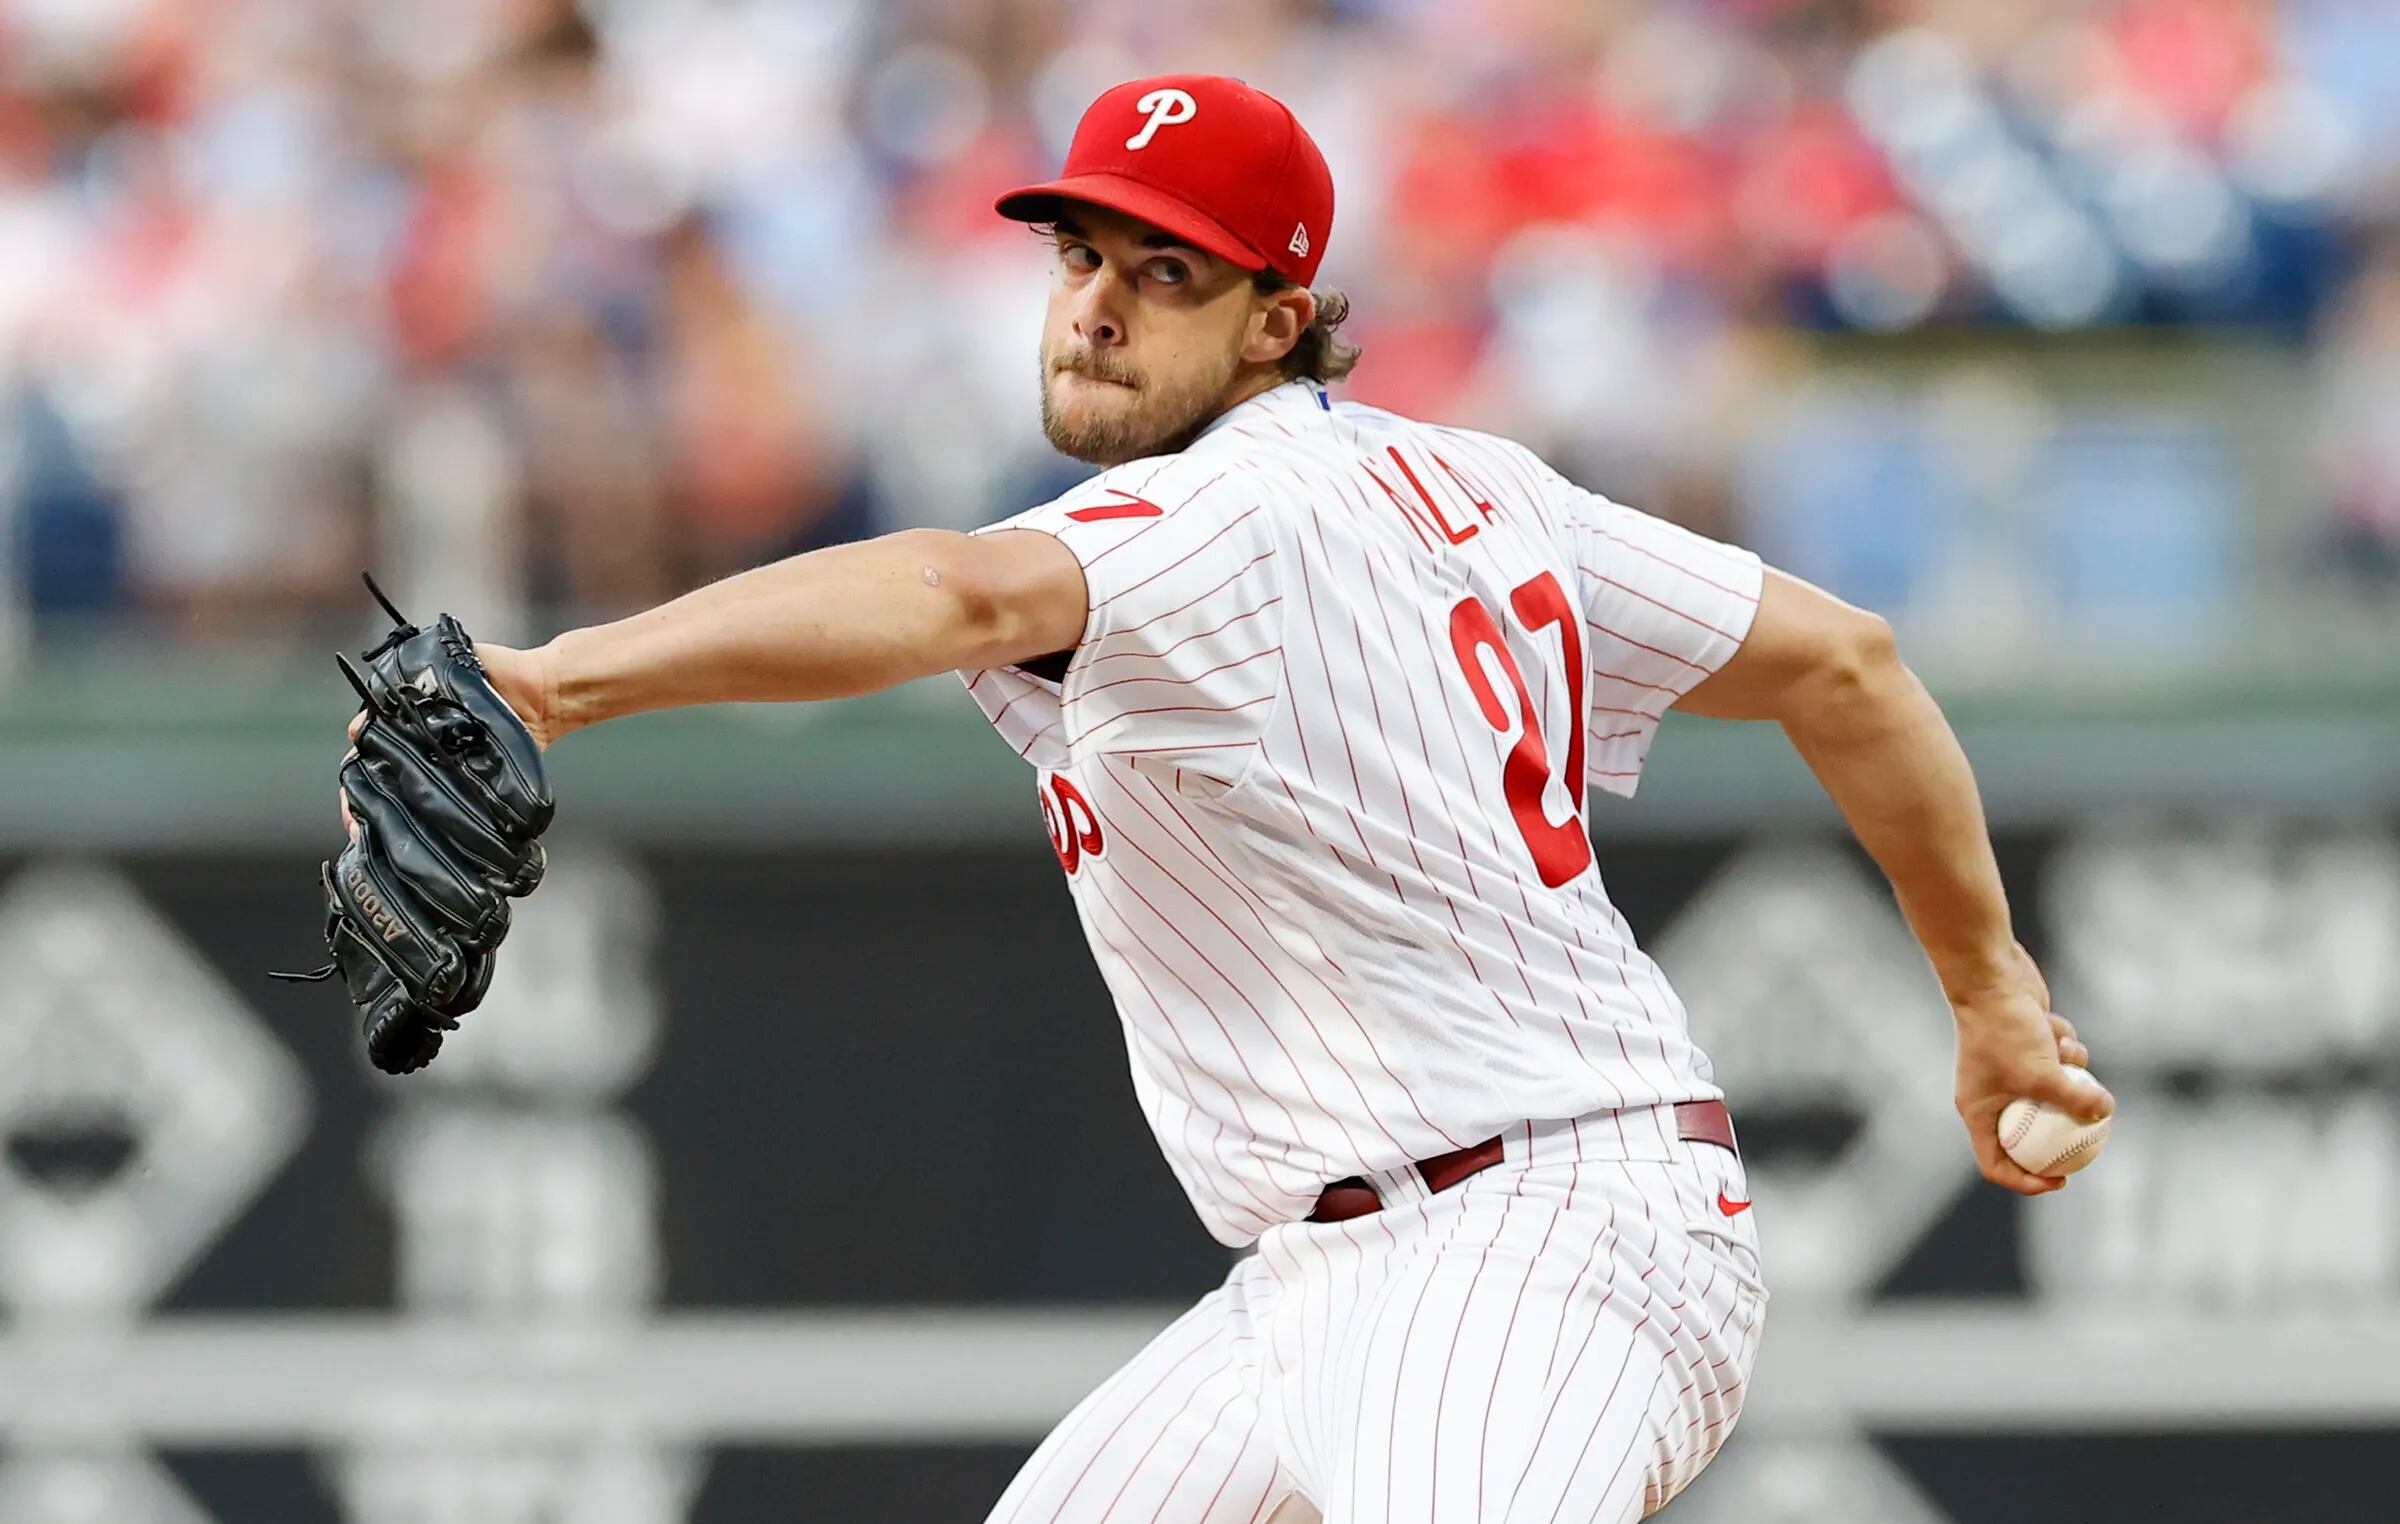 Aaron Nola's season has shades of Cole Hamels in 2009. Will the Phillies'  trust in him pay off?